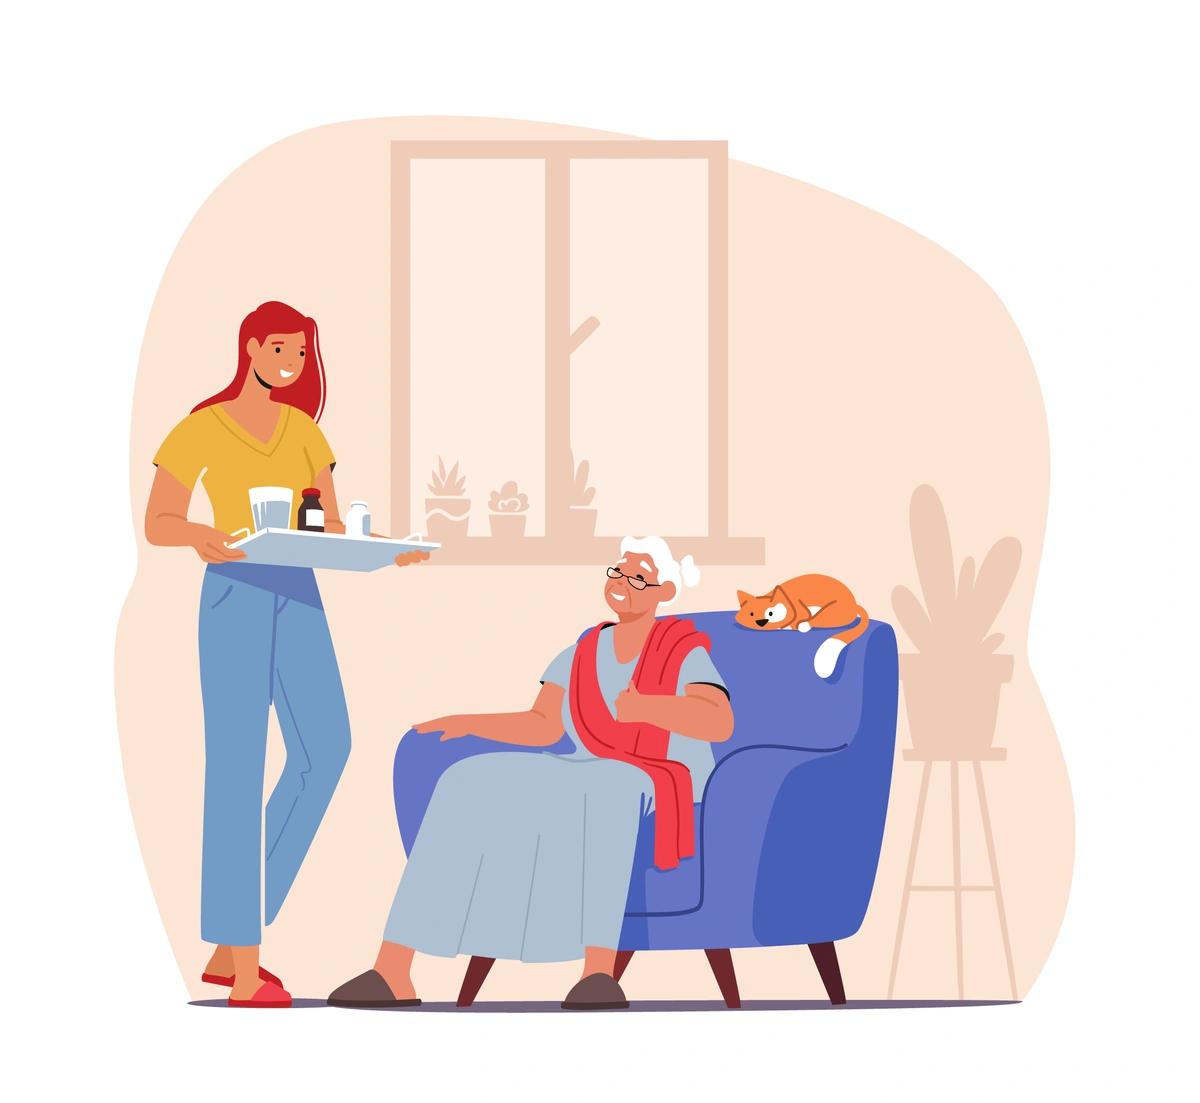 Illustration of a young woman caring for an elderly woman